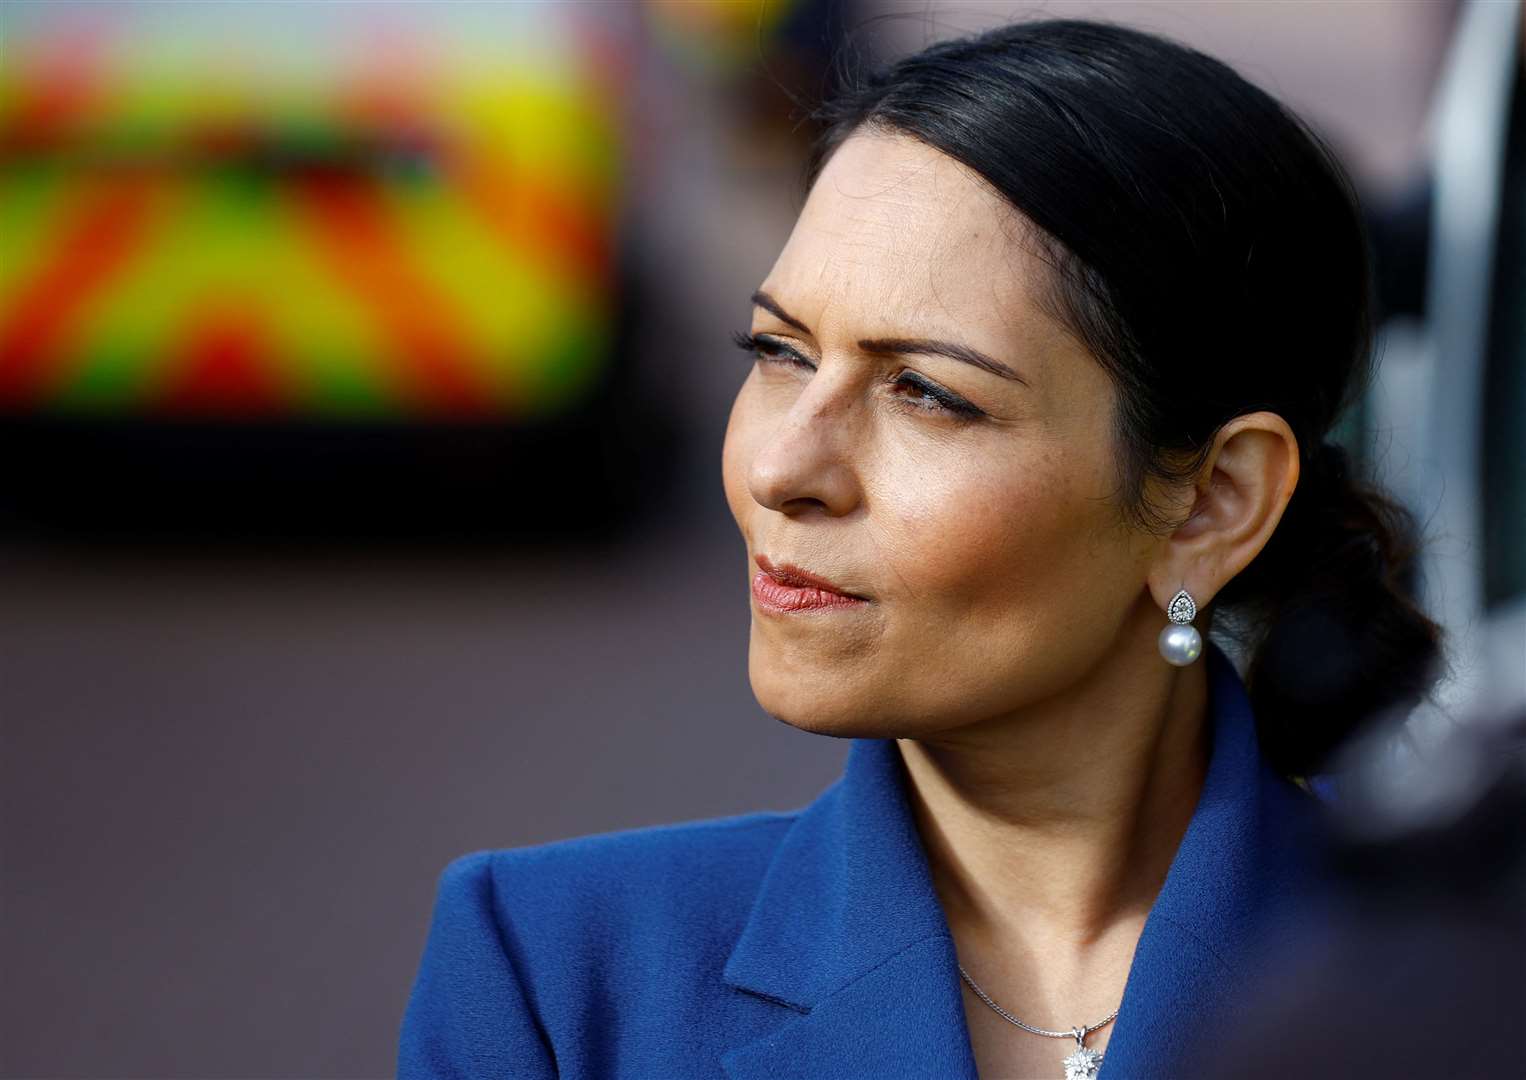 The review was ordered by former home secretary Priti Patel in 2019 (PA)